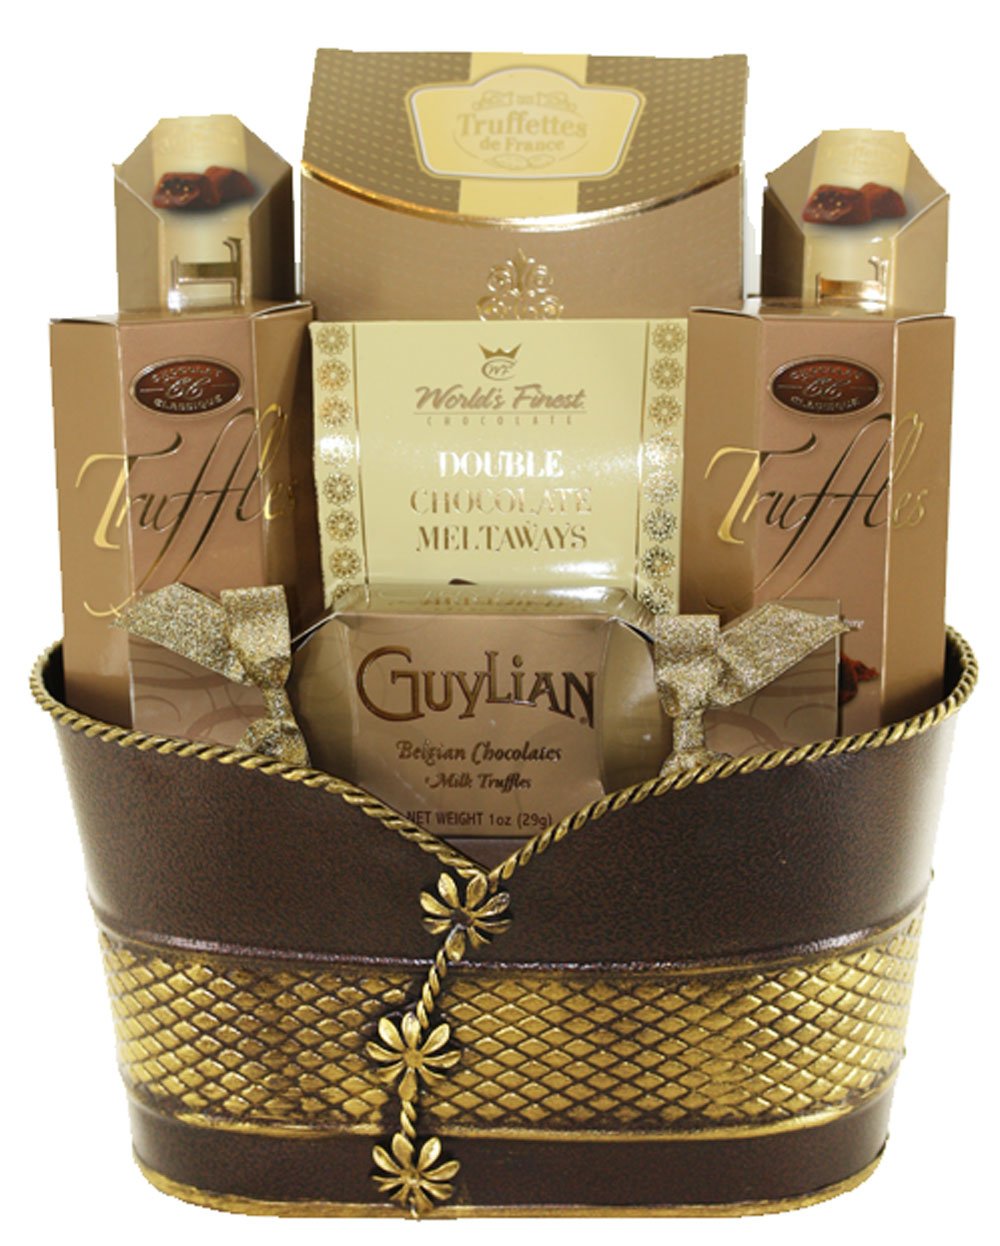 Rich Chocolate Canada's Gift Baskets Inc.